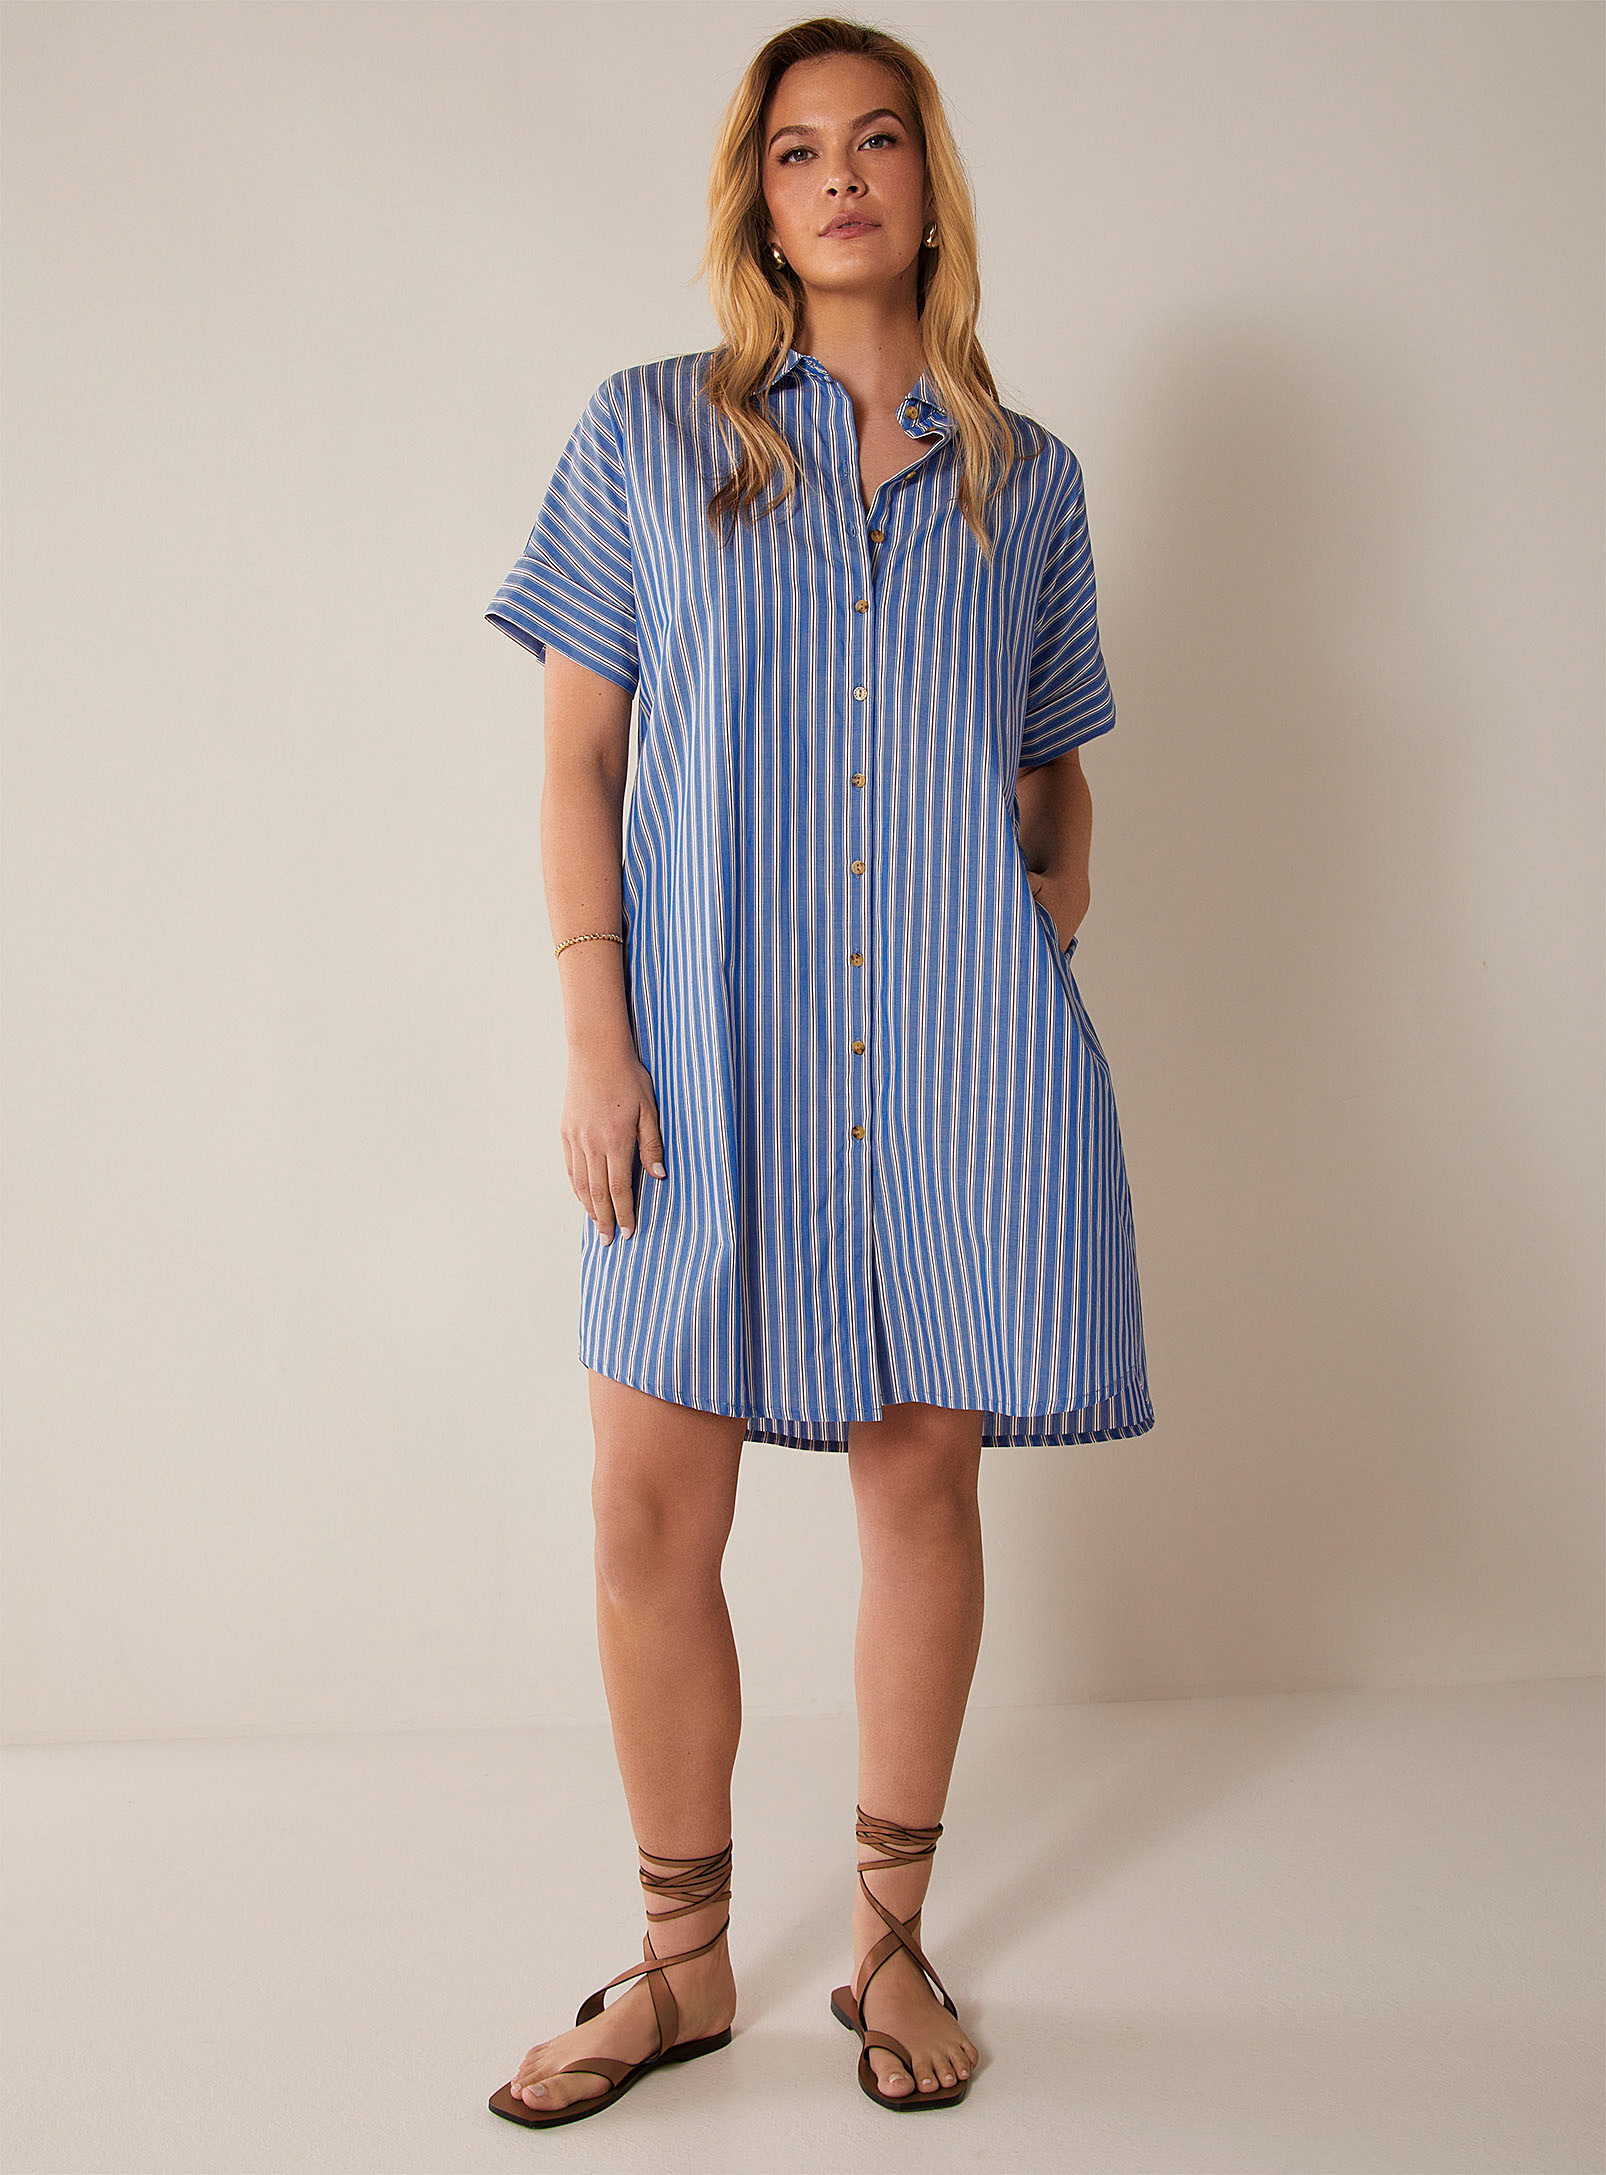 Yerse Tricolour Striped Shirtdress In Patterned Blue